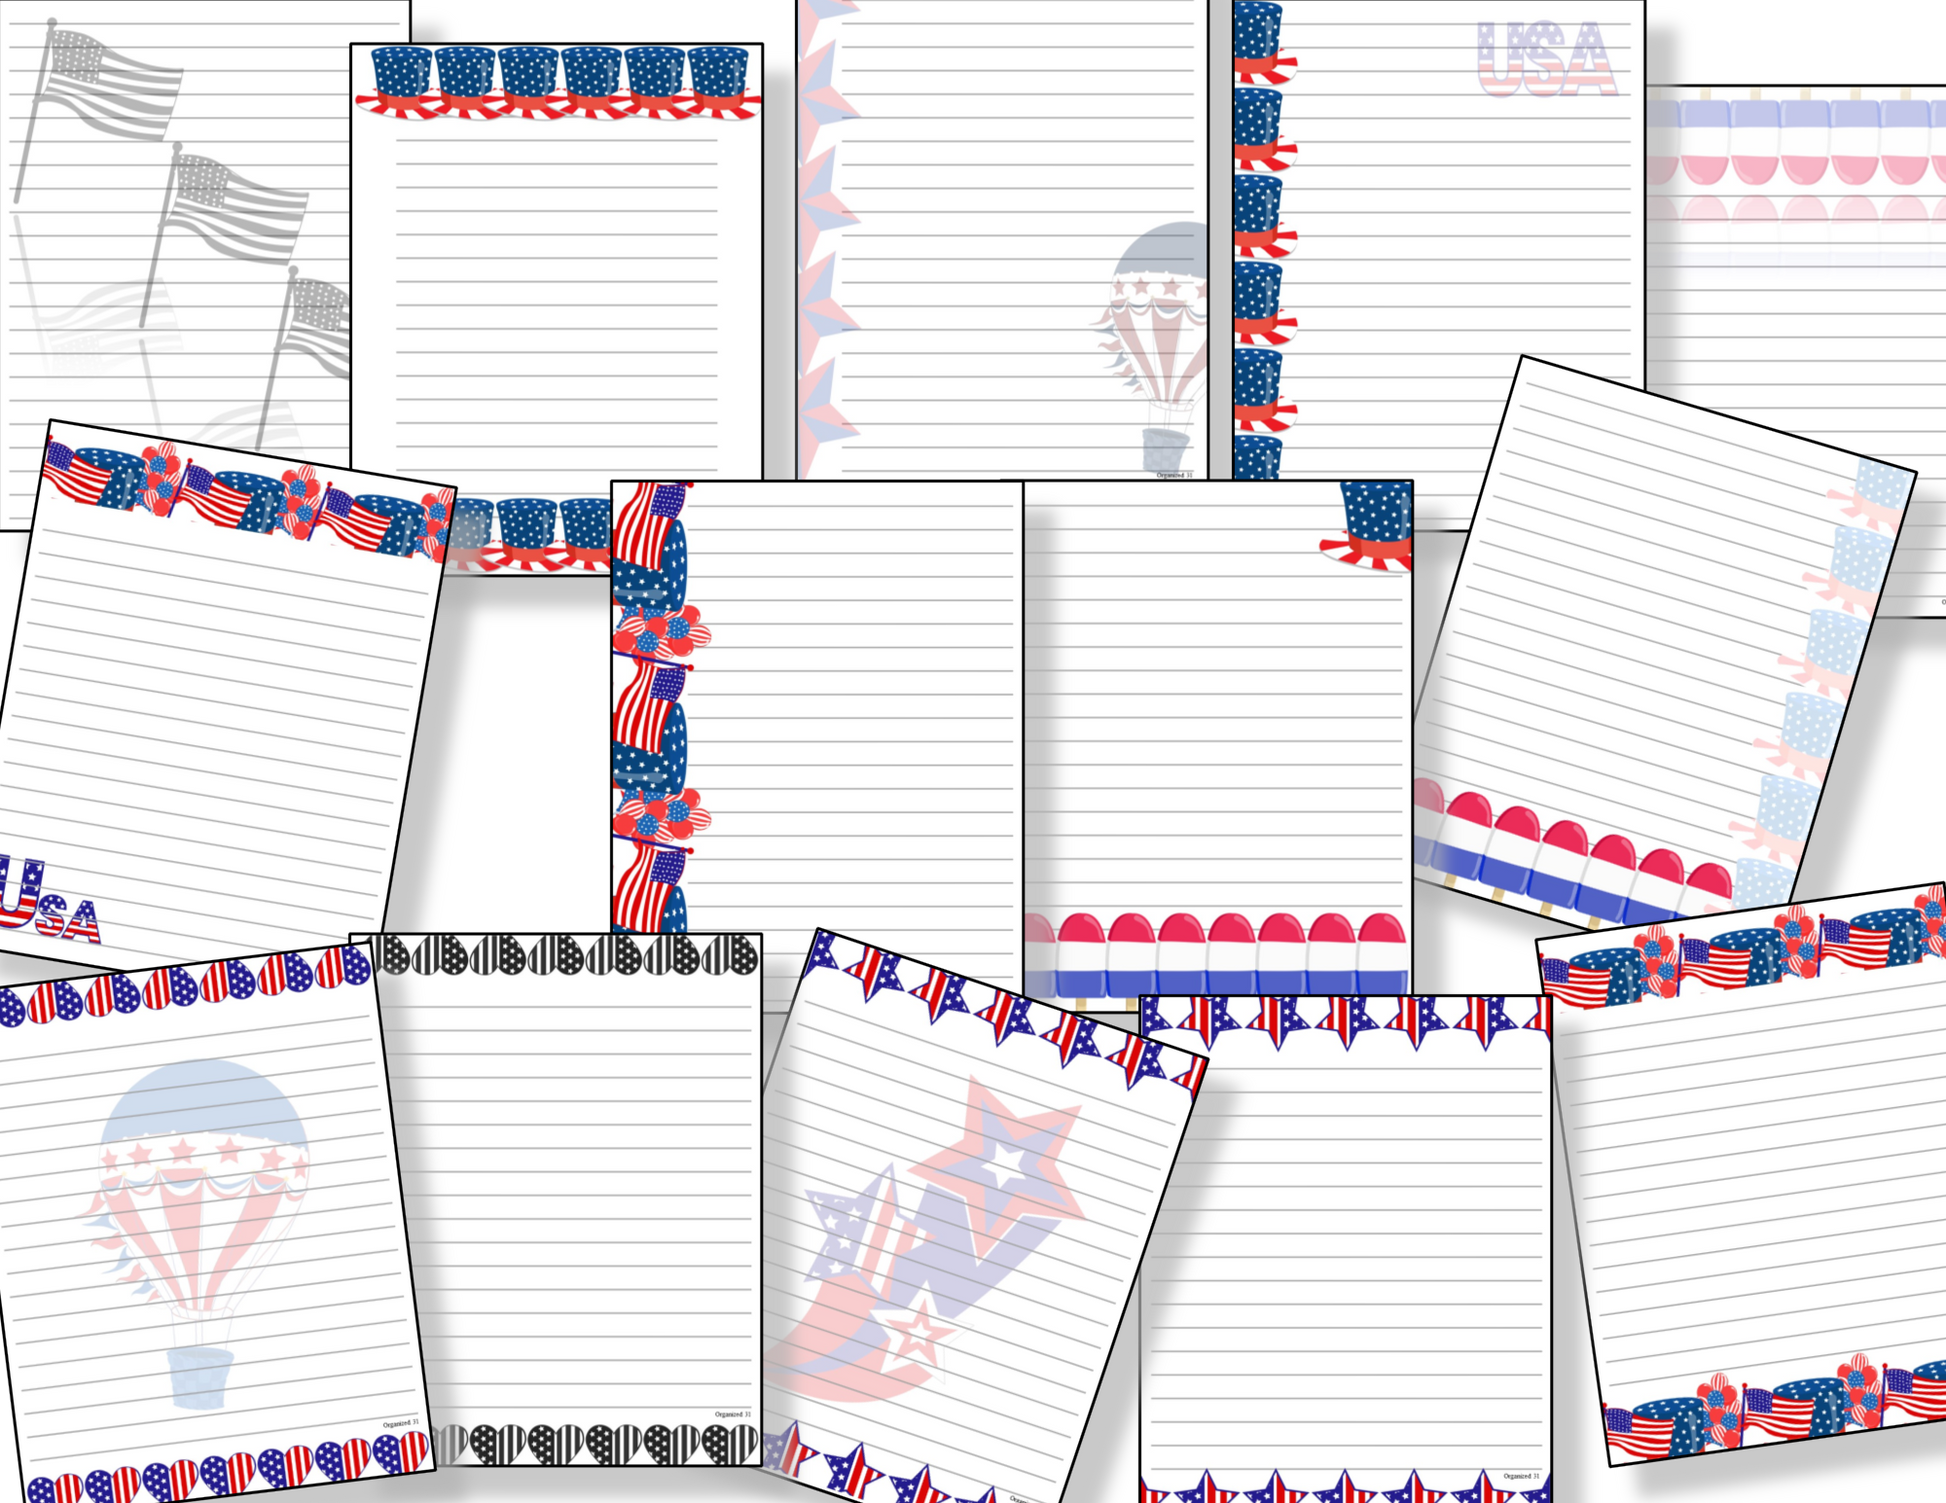 4th of July Patriotic Stationery notepads from the Organized 31 Shop.